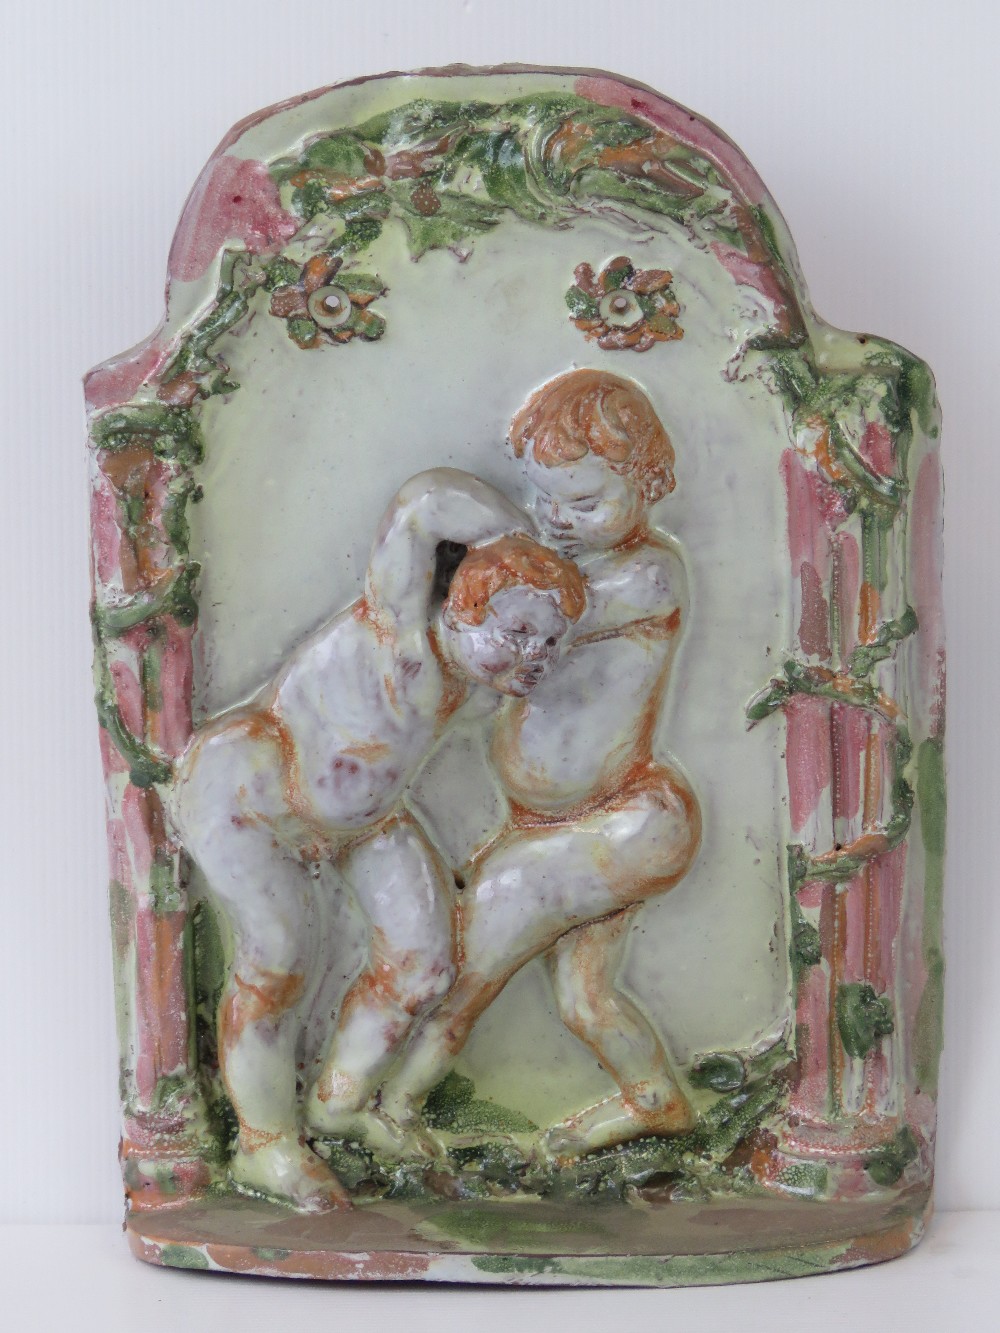 A ceramic wall plaque featuring boys fig